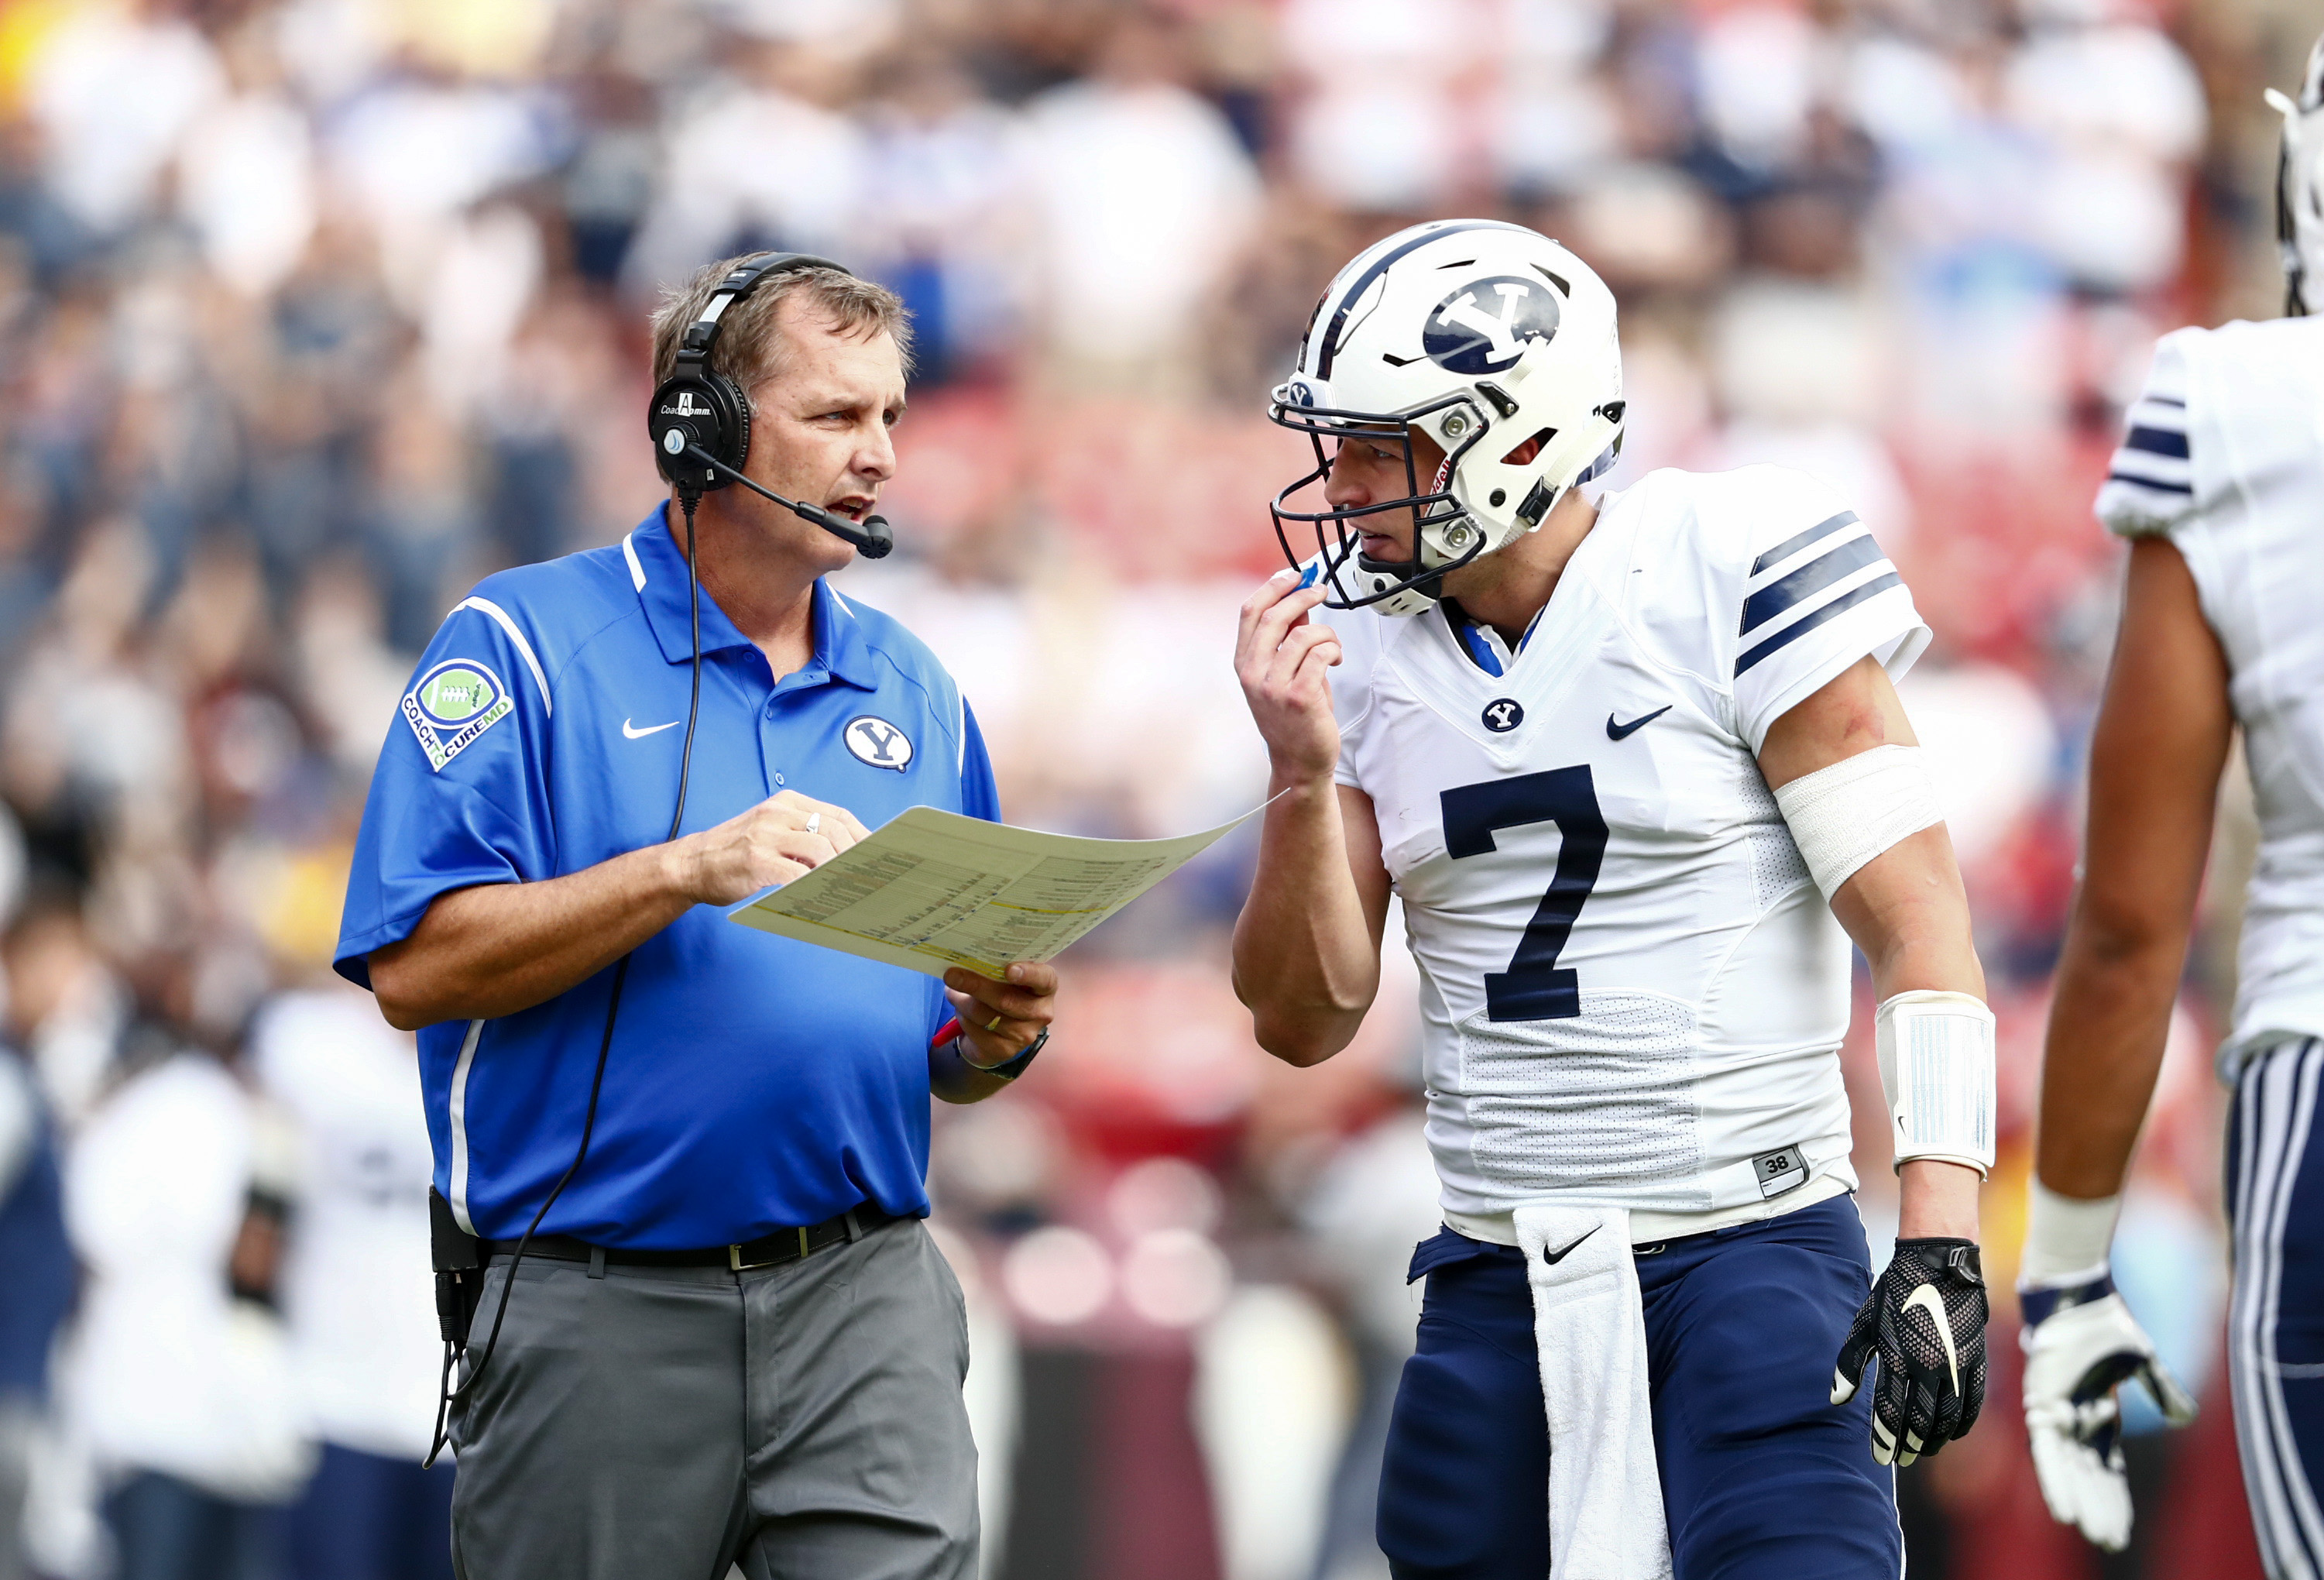 Offensive coordinator Ty Detmer discusses a play call with quarterback Taysom Hill. (BYU Photo)